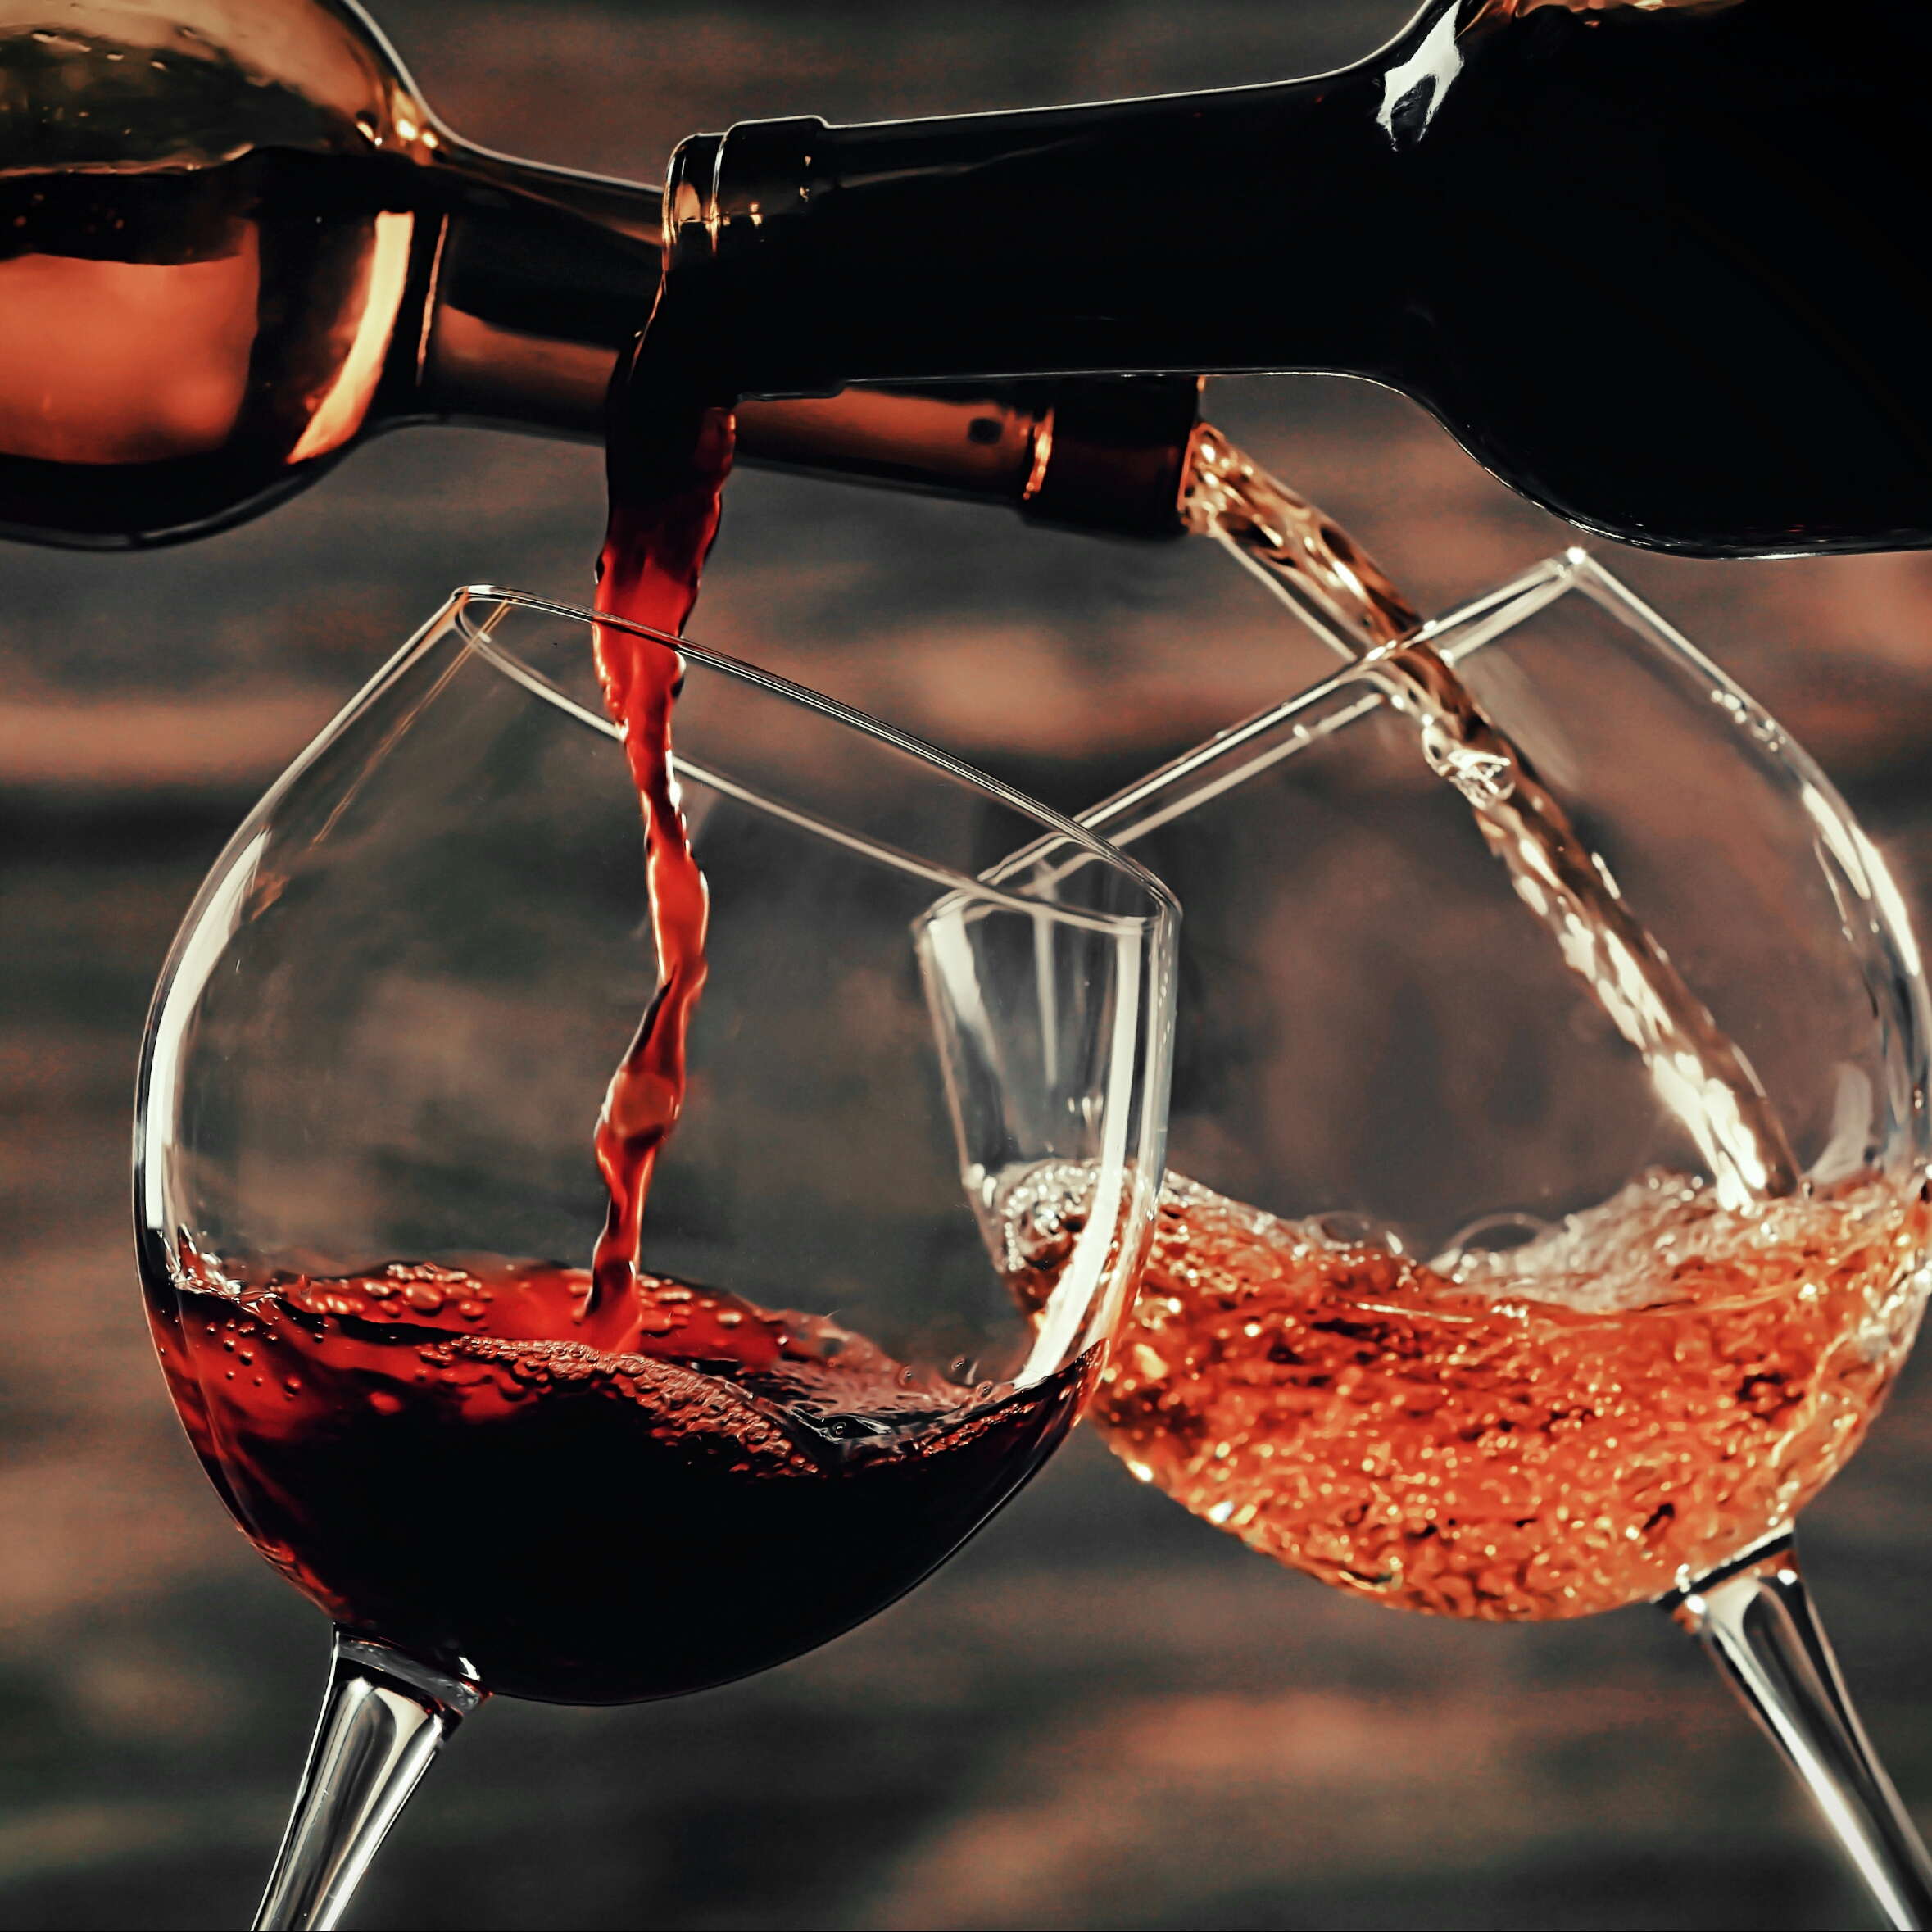 Wine Retailer to Buy Majority Stake in Japanese Bitcoin Exchange for $30M